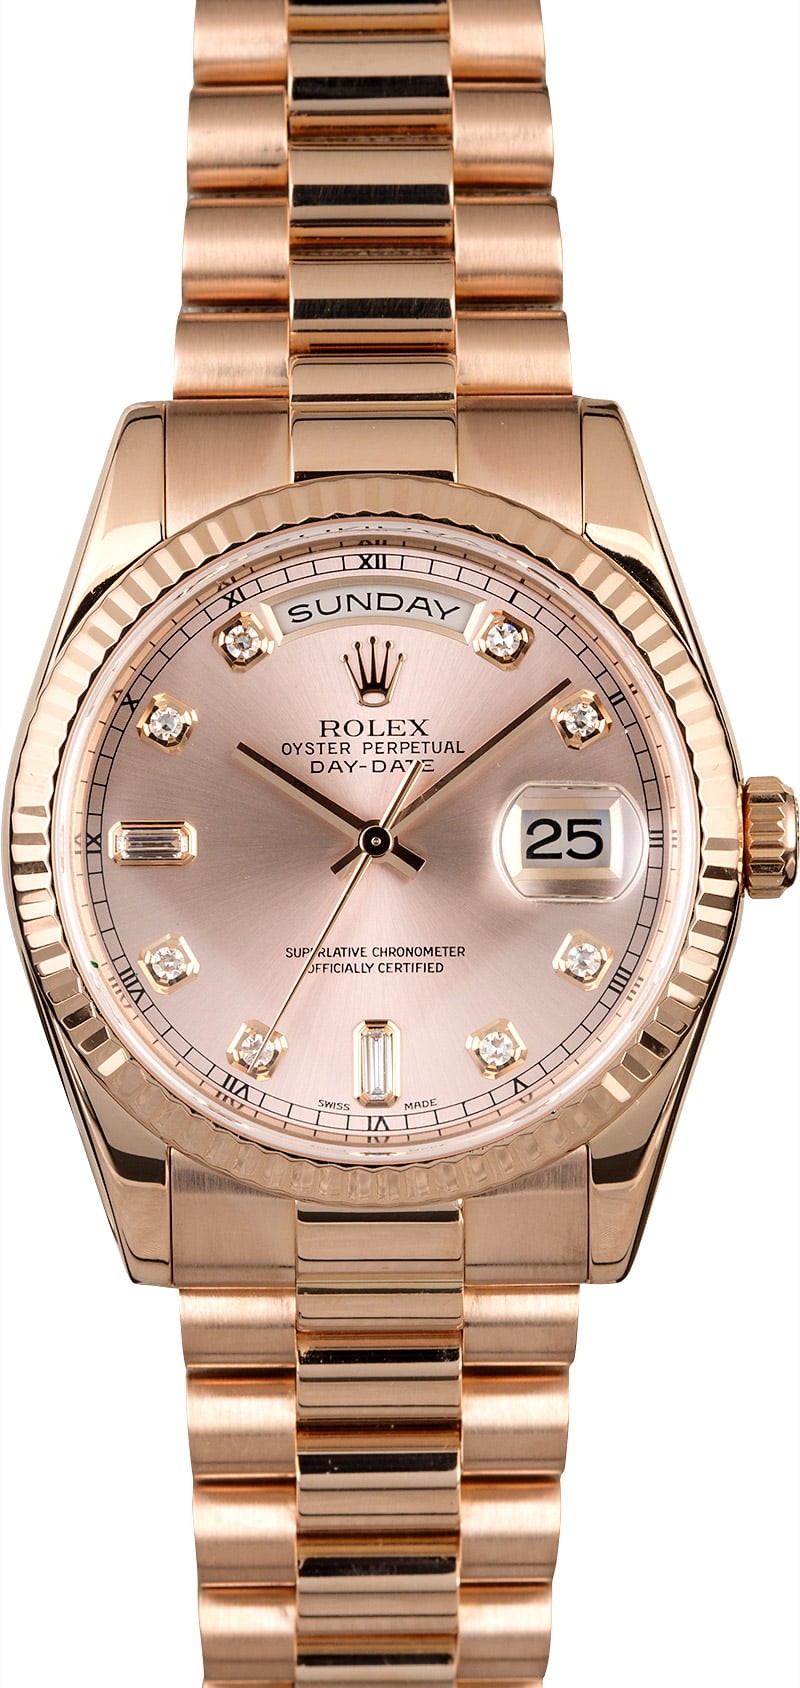 Rolex Day-Date President 118235 Everose Gold WE03754